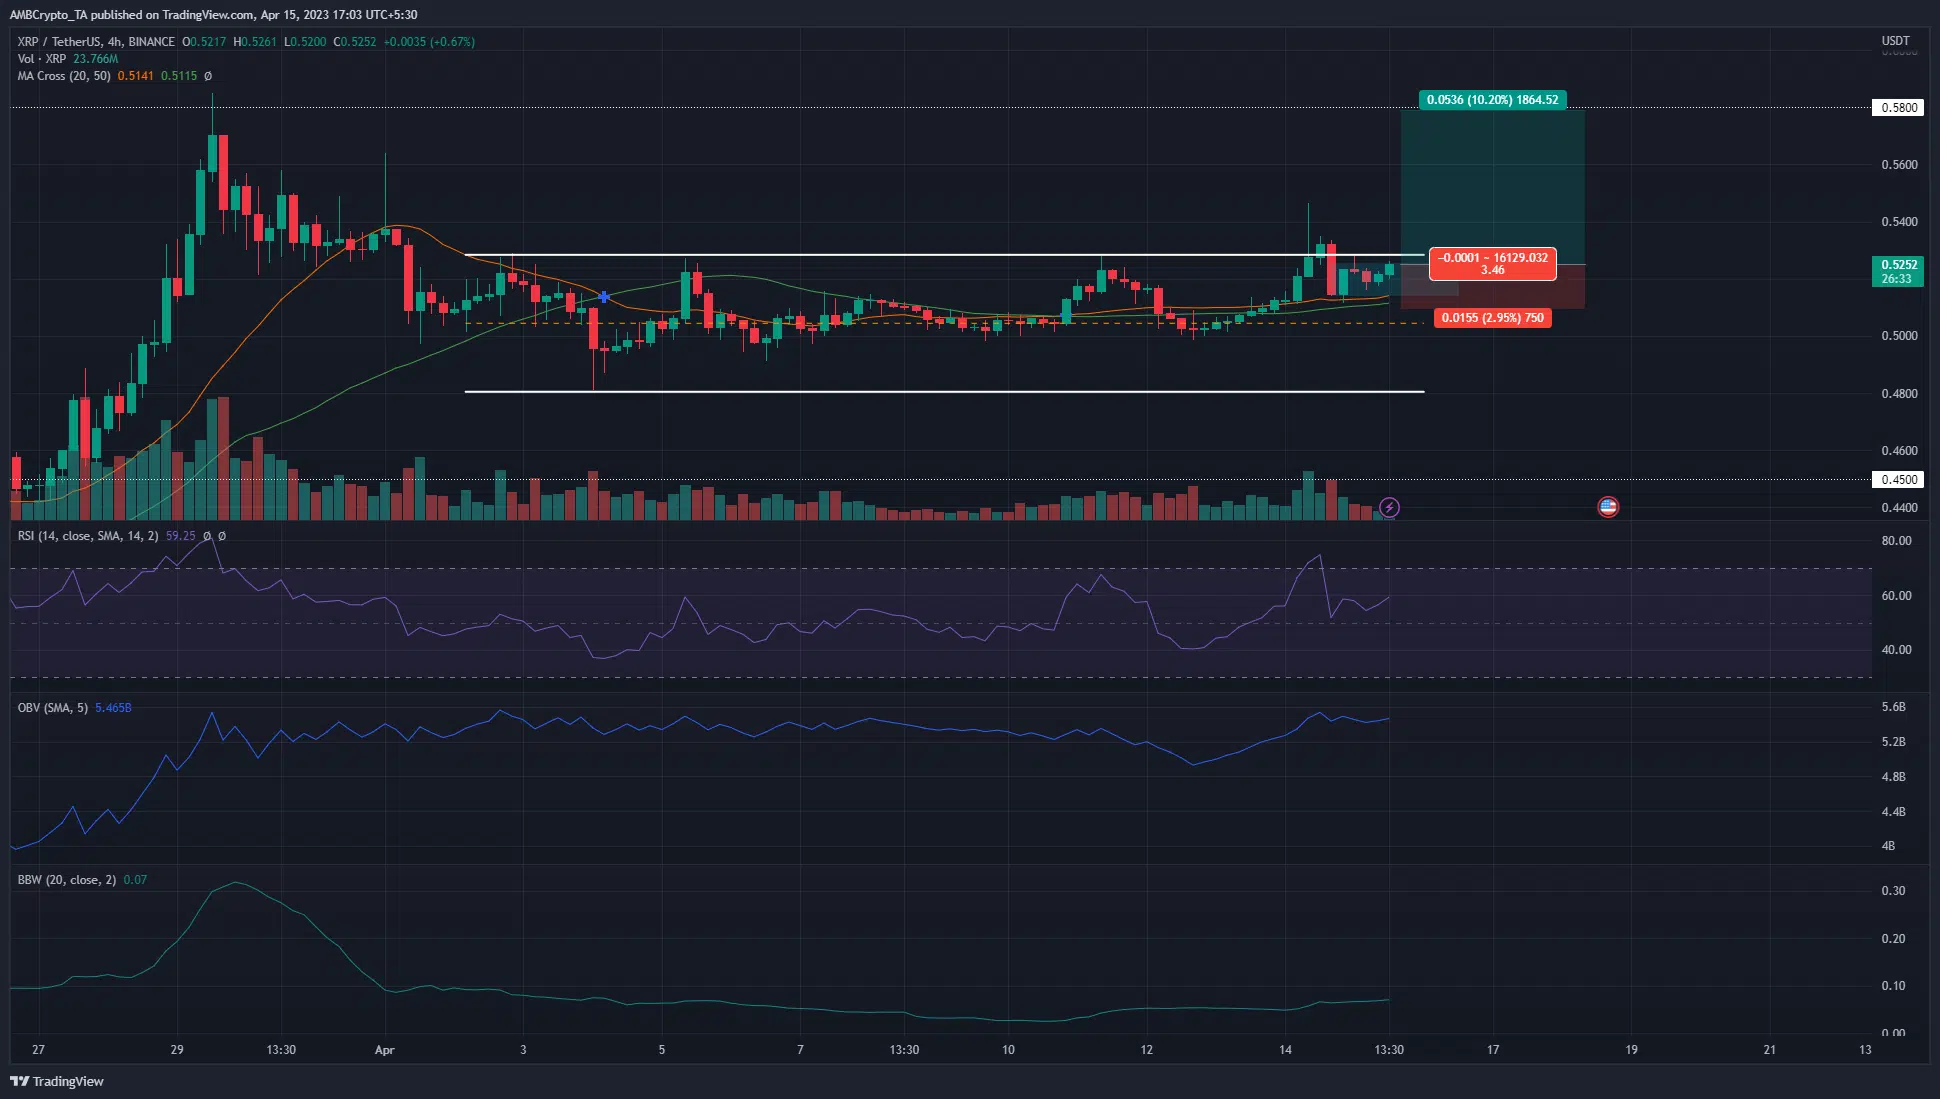 Is XRP capable of pushing to $0.58 again?